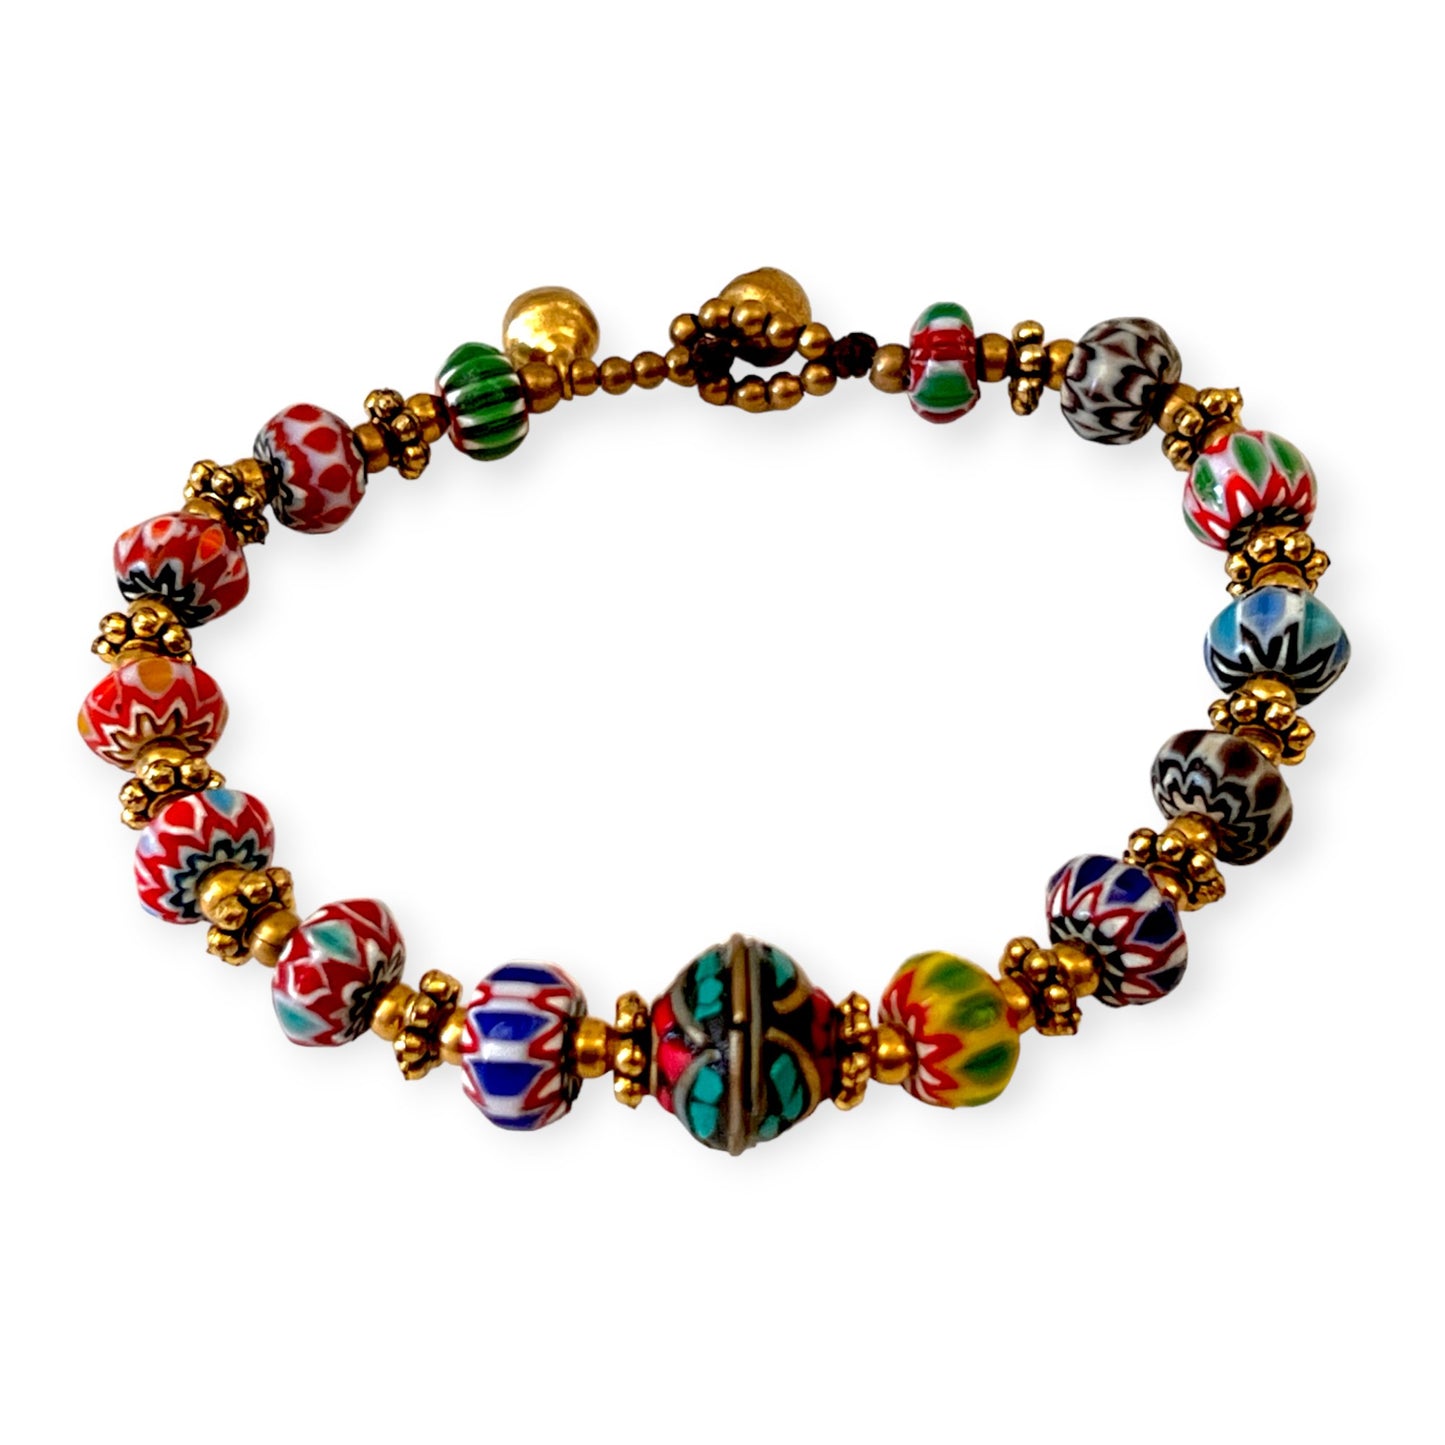 Colorful trade beads bracelet with brass accents - Sundara Joon